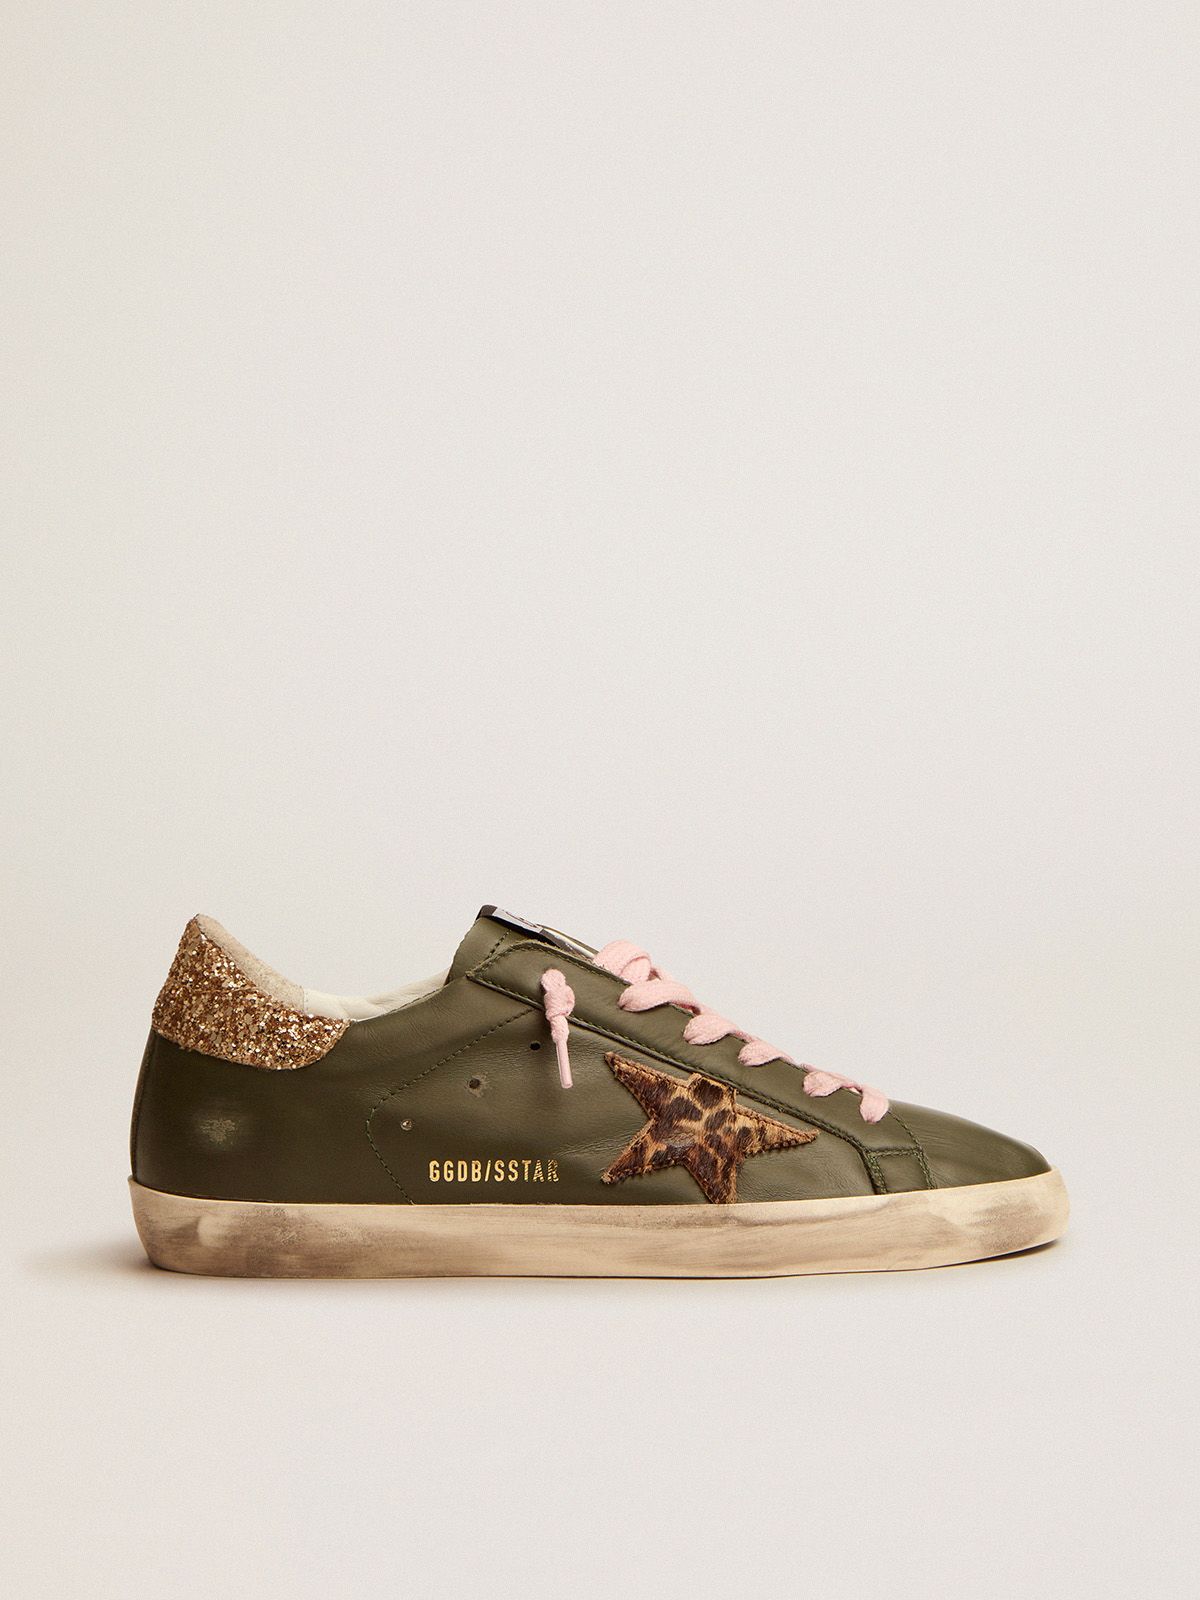 golden goose heel sneakers Super-Star gold green in glitter tab with dark leather